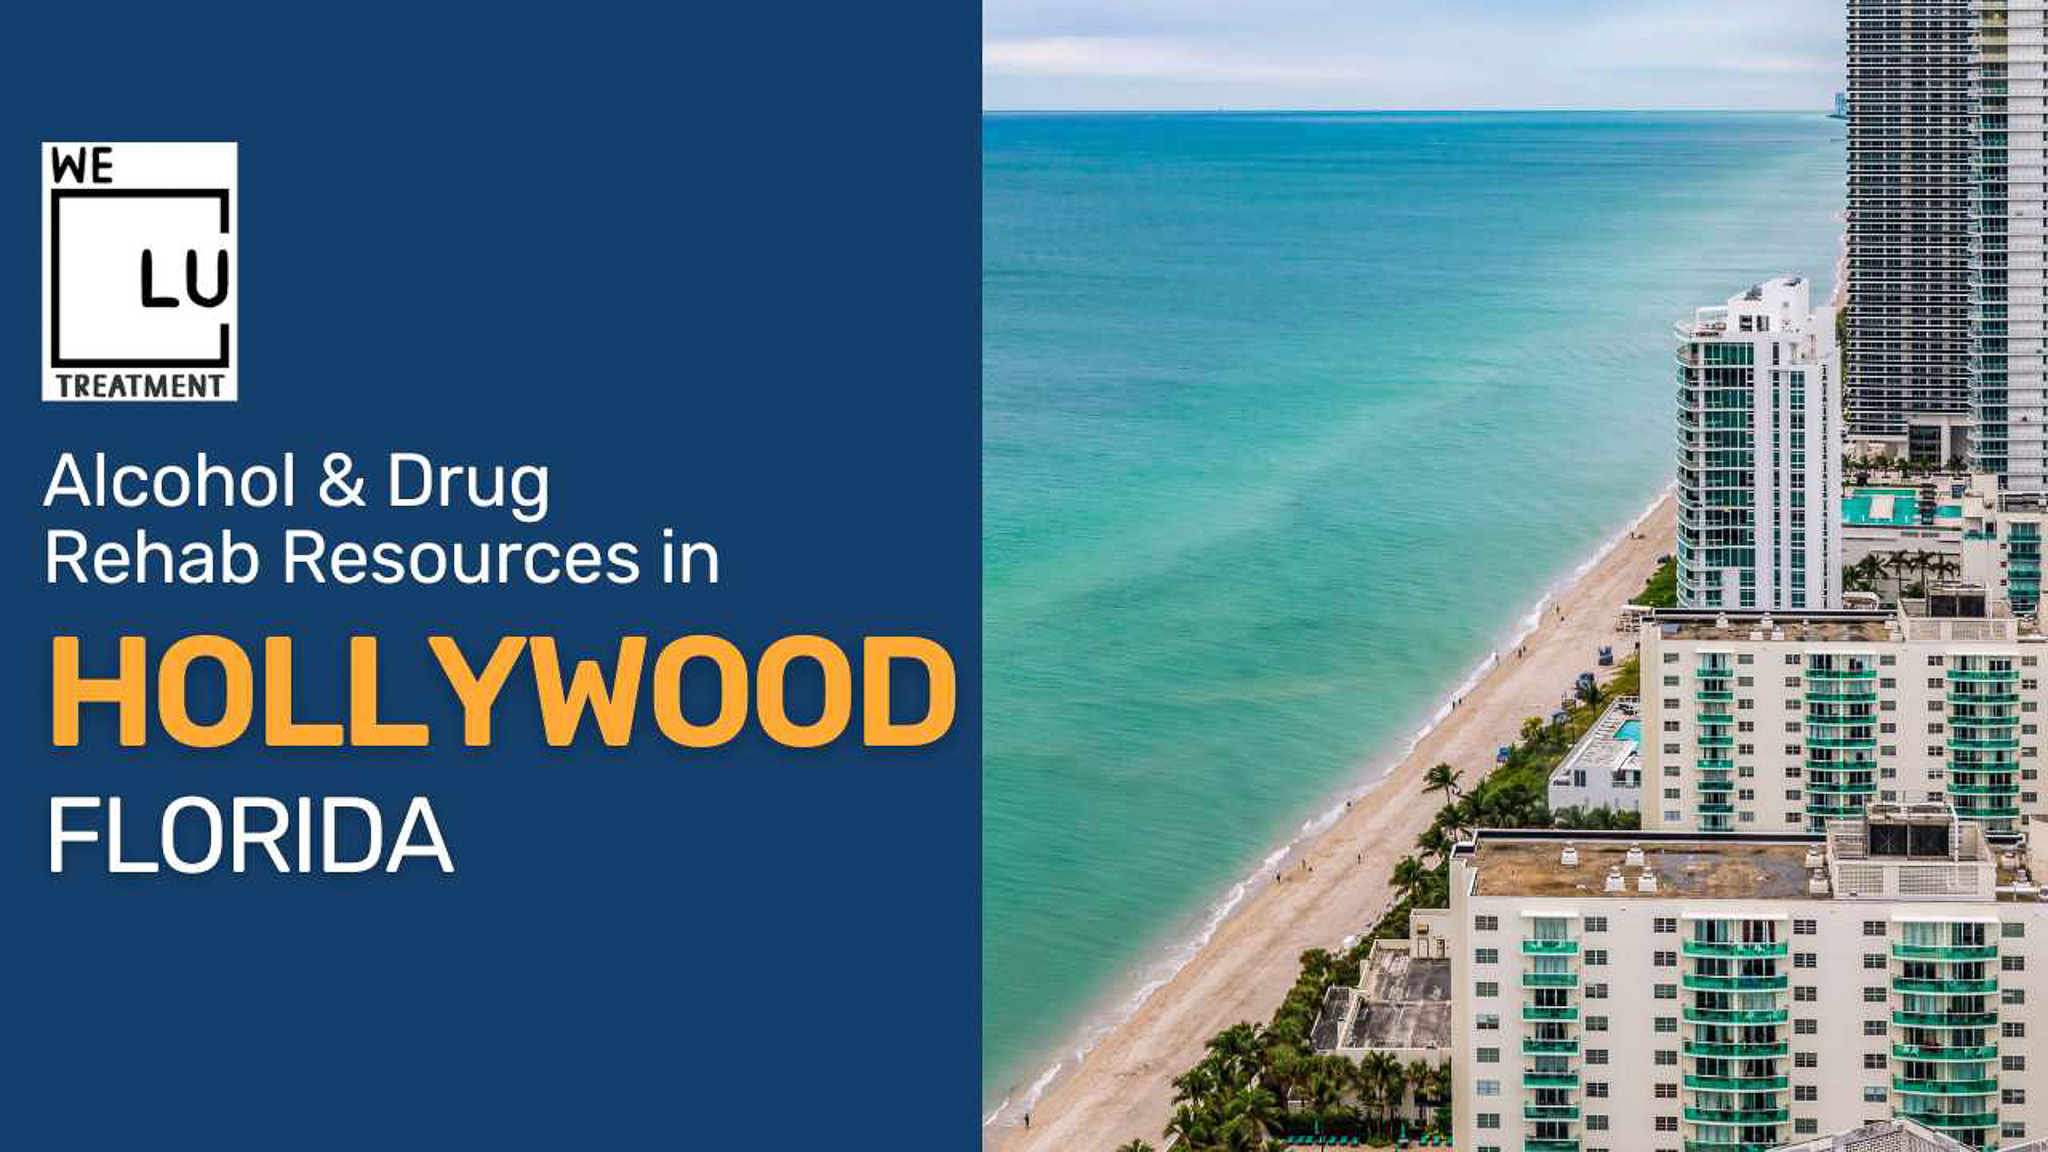 Hollywood FL (SA) We Level Up treatment center for drug and alcohol rehab detox and mental health services - Image 1